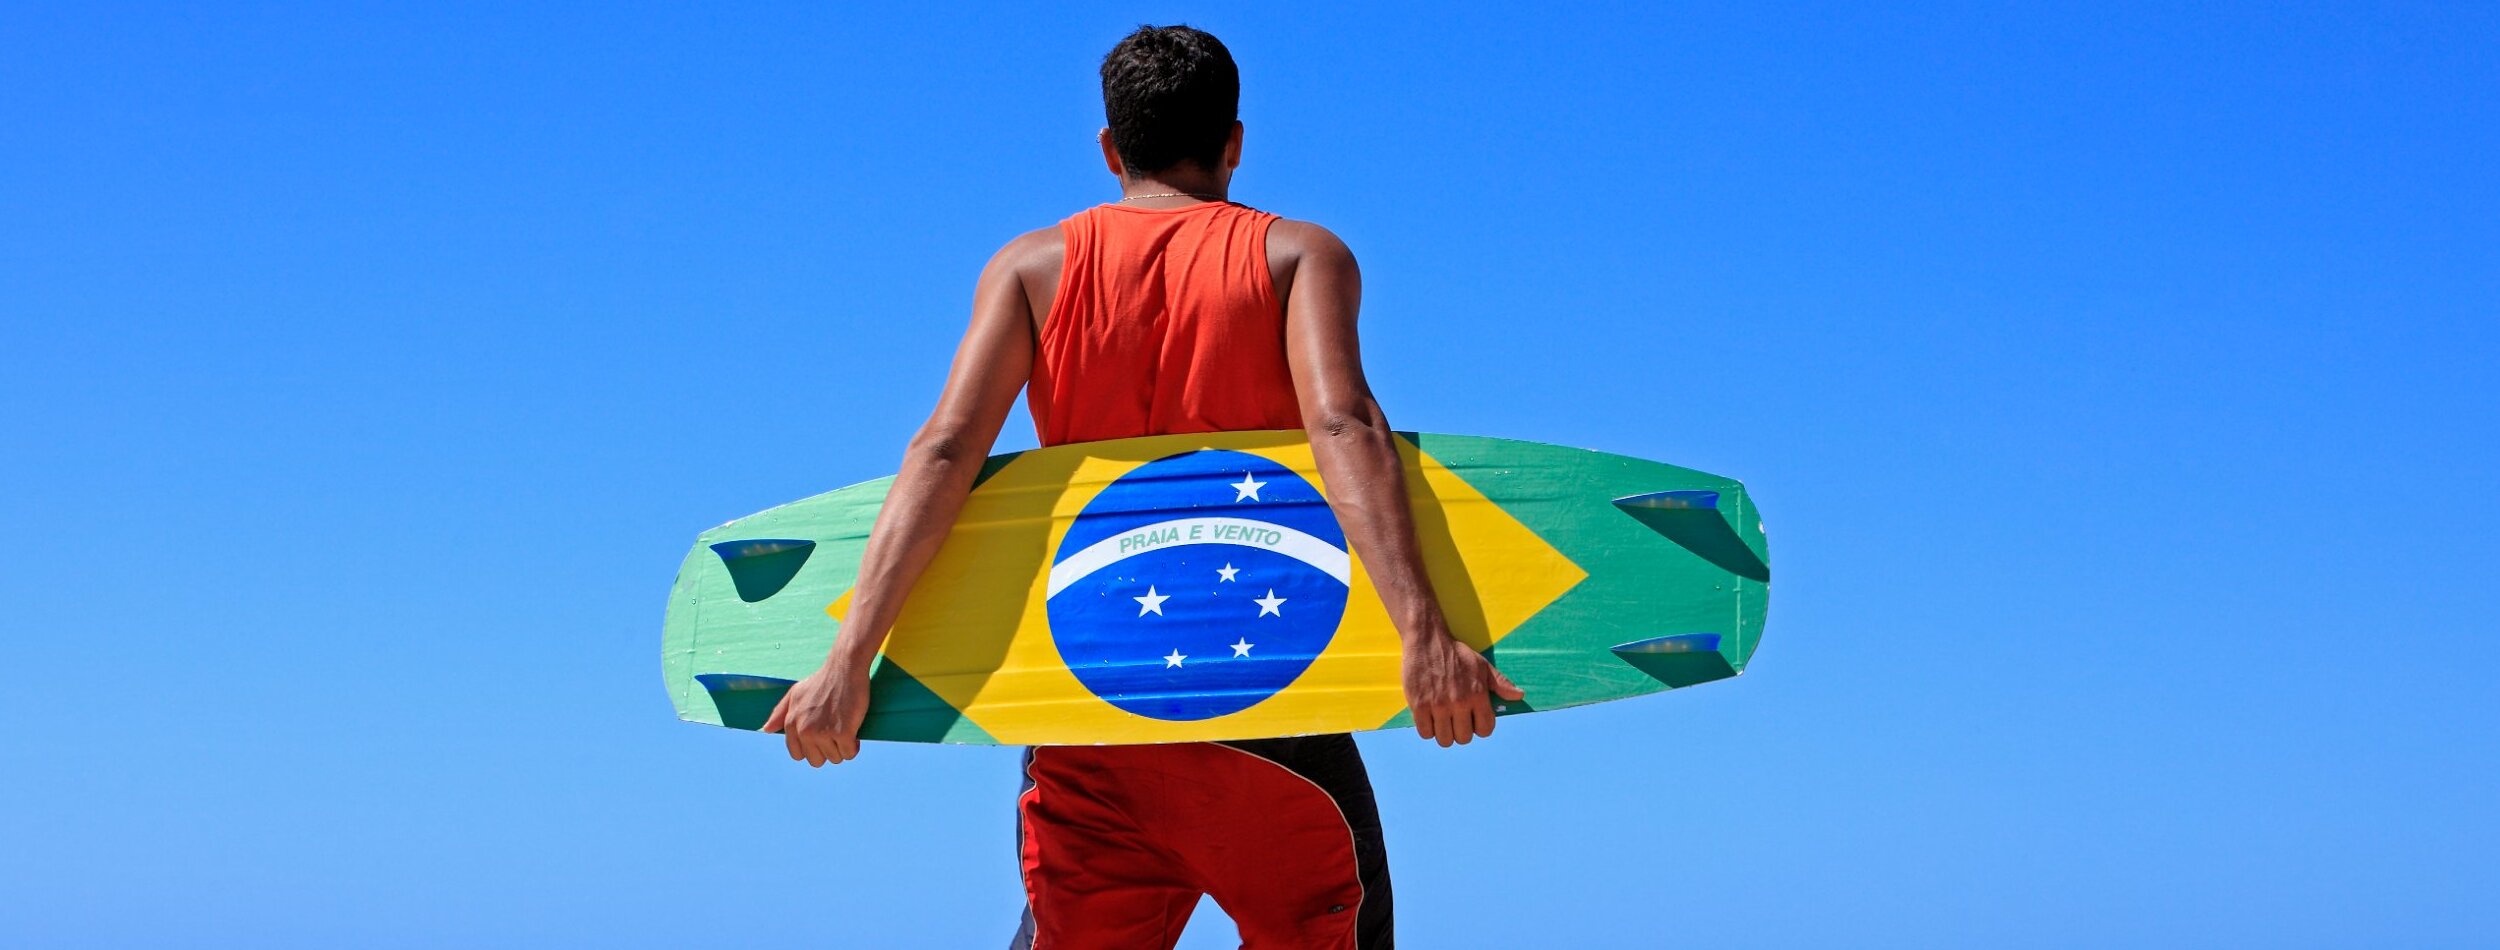 A guy showing a board with the brazil flag painted on.